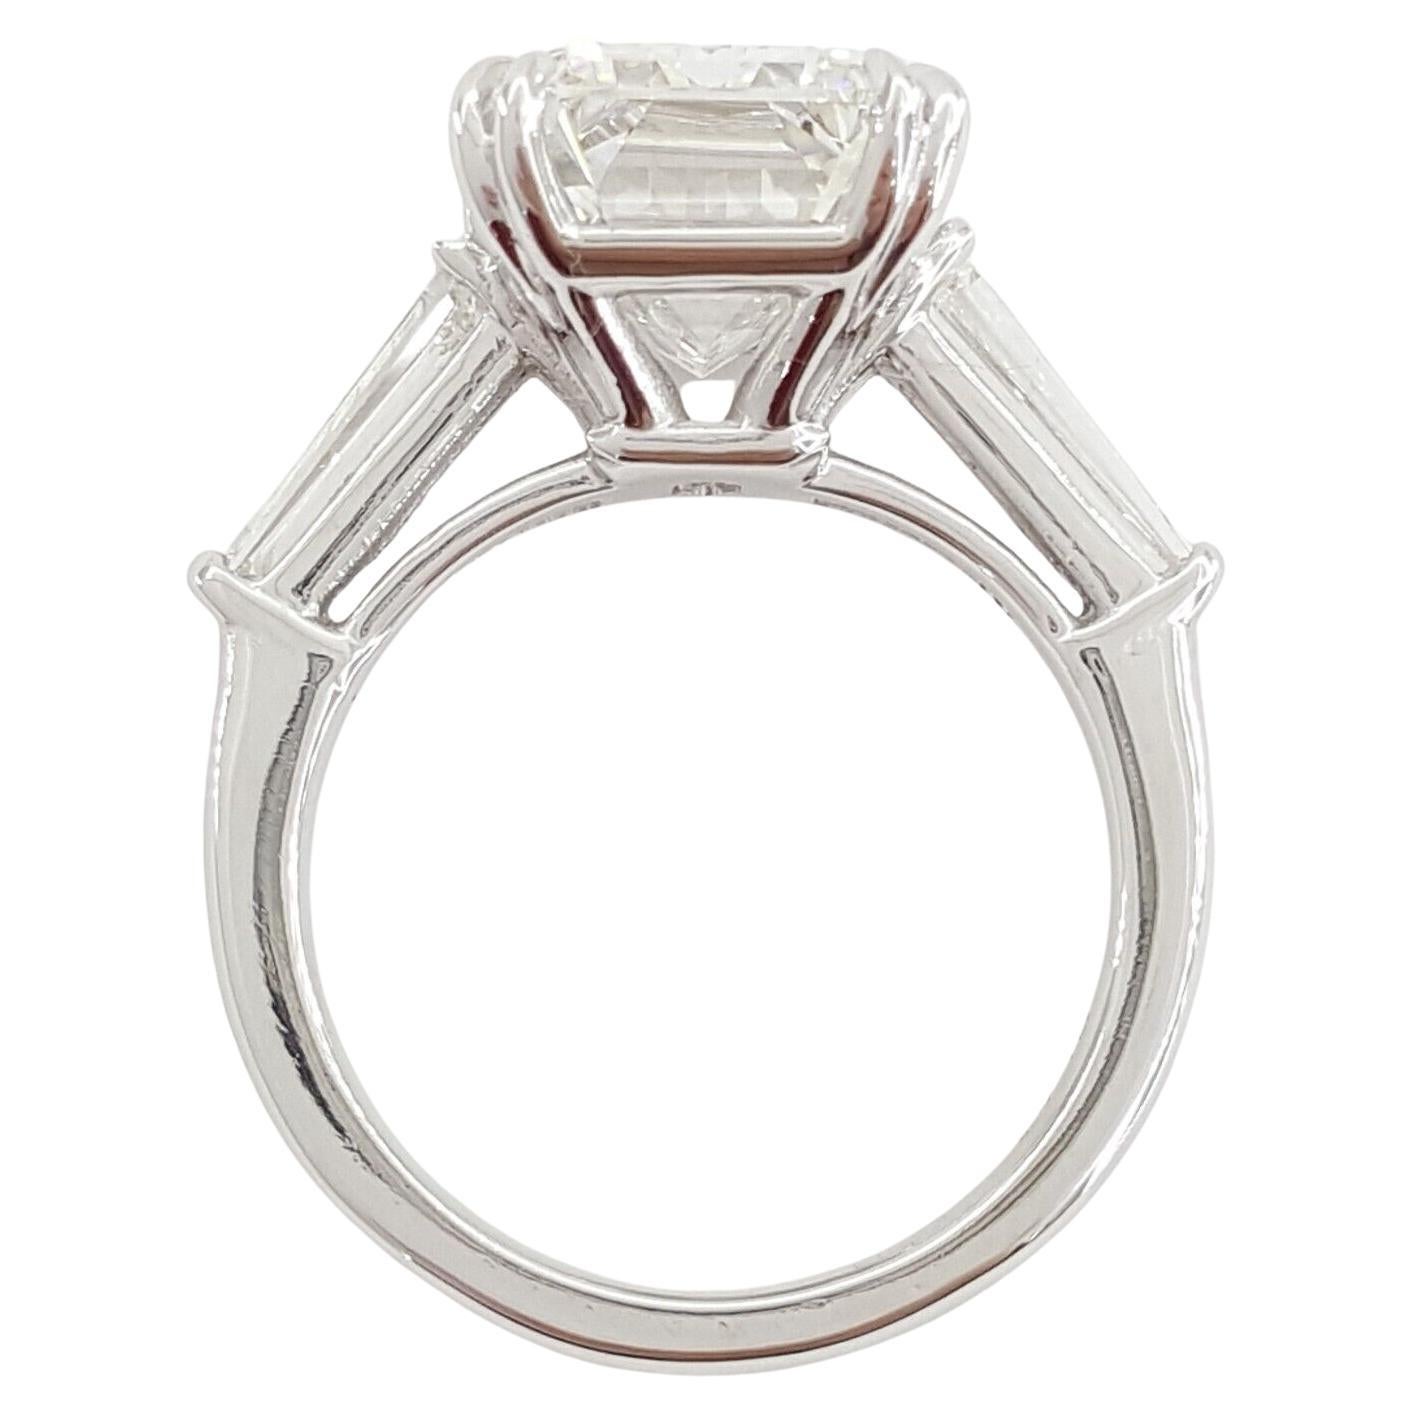 7.03 ct total weight Platinum Emerald Cut Diamond Three-Stone Engagement Ring.



The ring weighs 9.5 grams, size 5.5, the center stone is a Natural Emerald Cut diamond weighing 6.38 ct, E in color, VVS2 in clarity, 62.4% Depth, 67% Table, Ideal